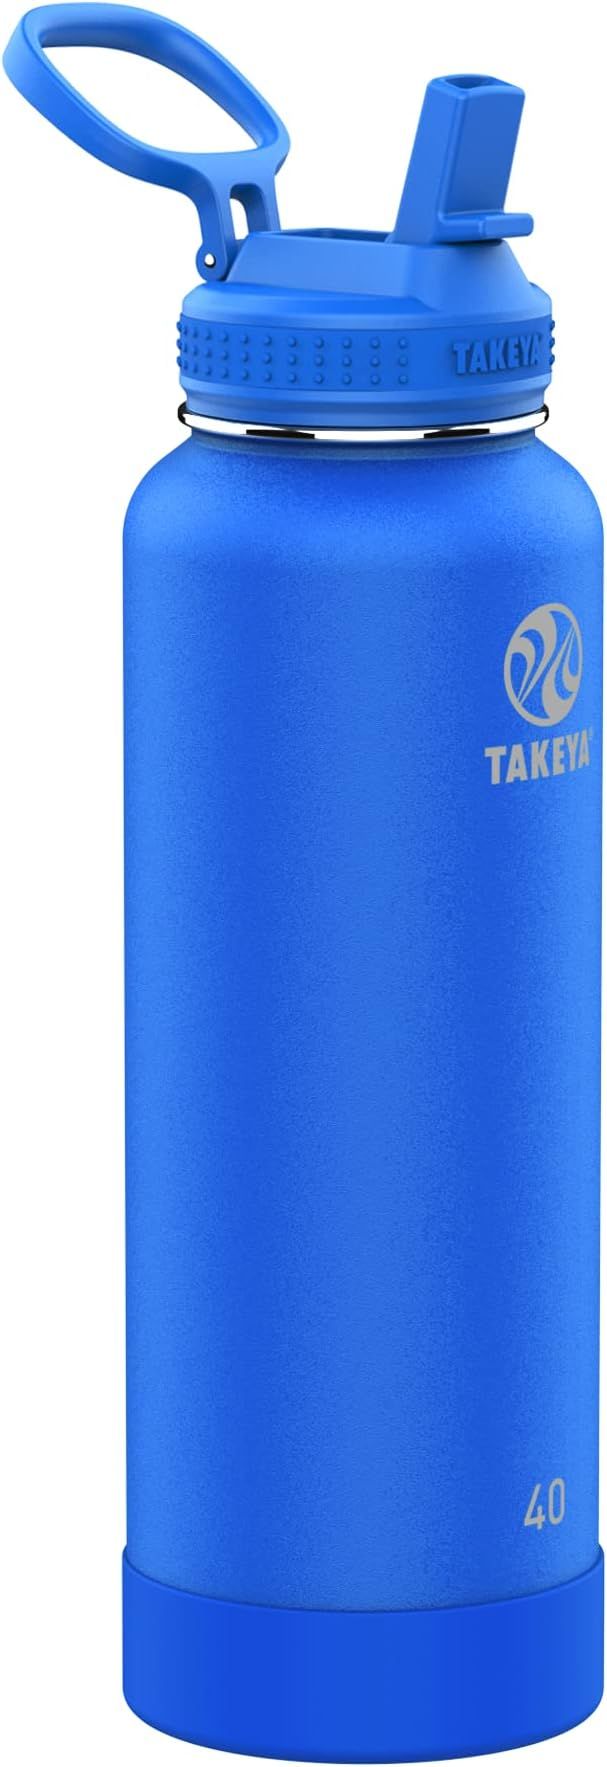 Takeya Actives Insulated Stainless Steel Water Bottle with Straw Lid, 40 Ounce, Cobalt | Amazon (US)